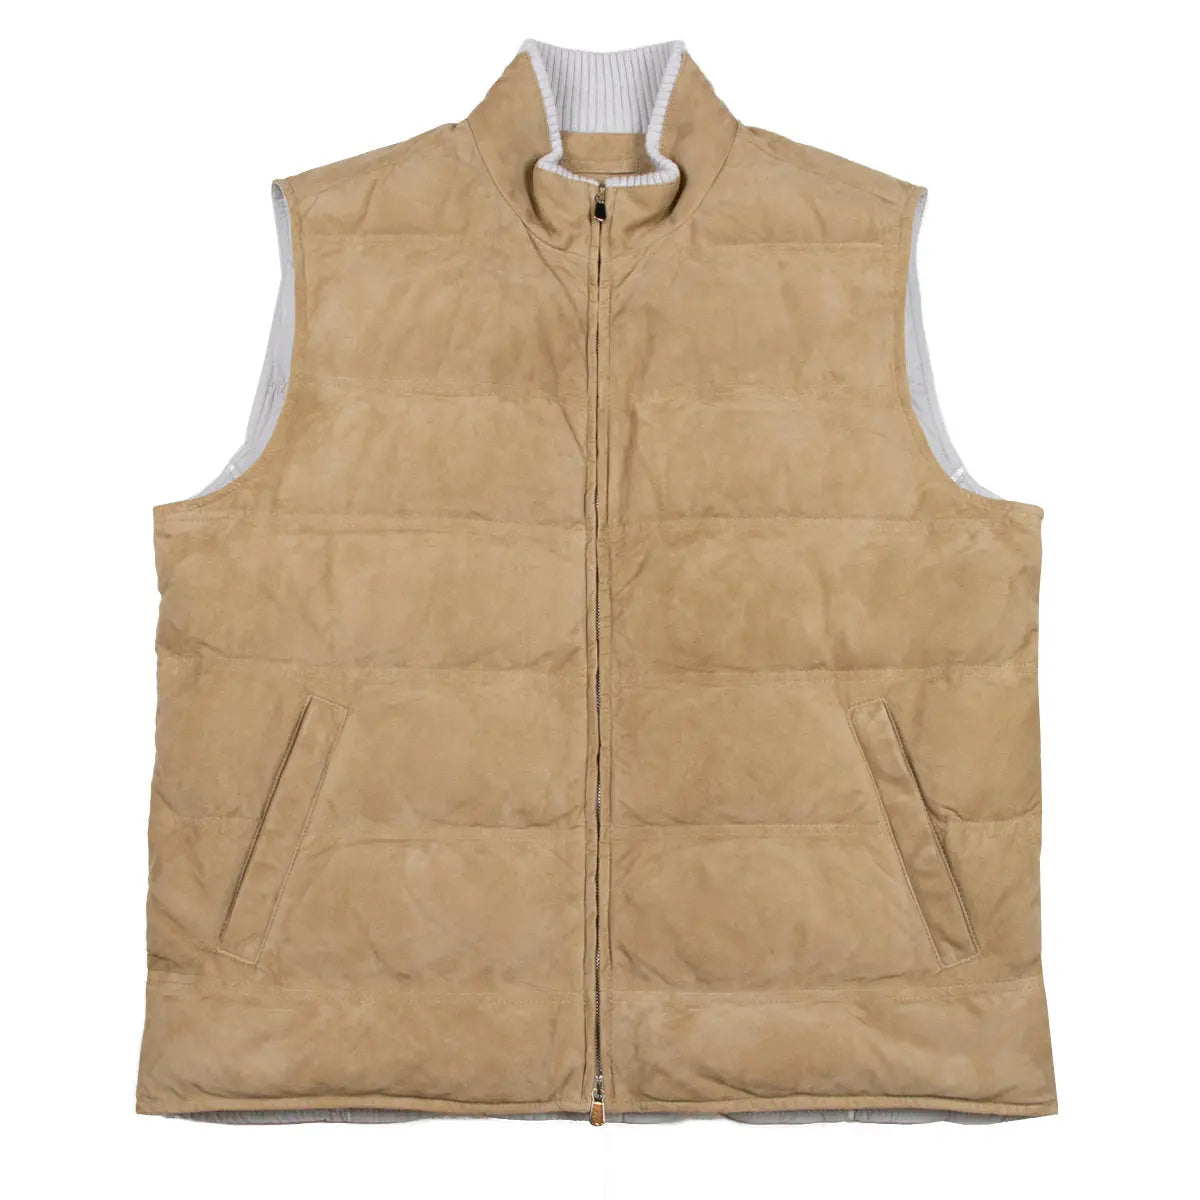 Tan Goat Suede Padded Gilet  Robert Old   